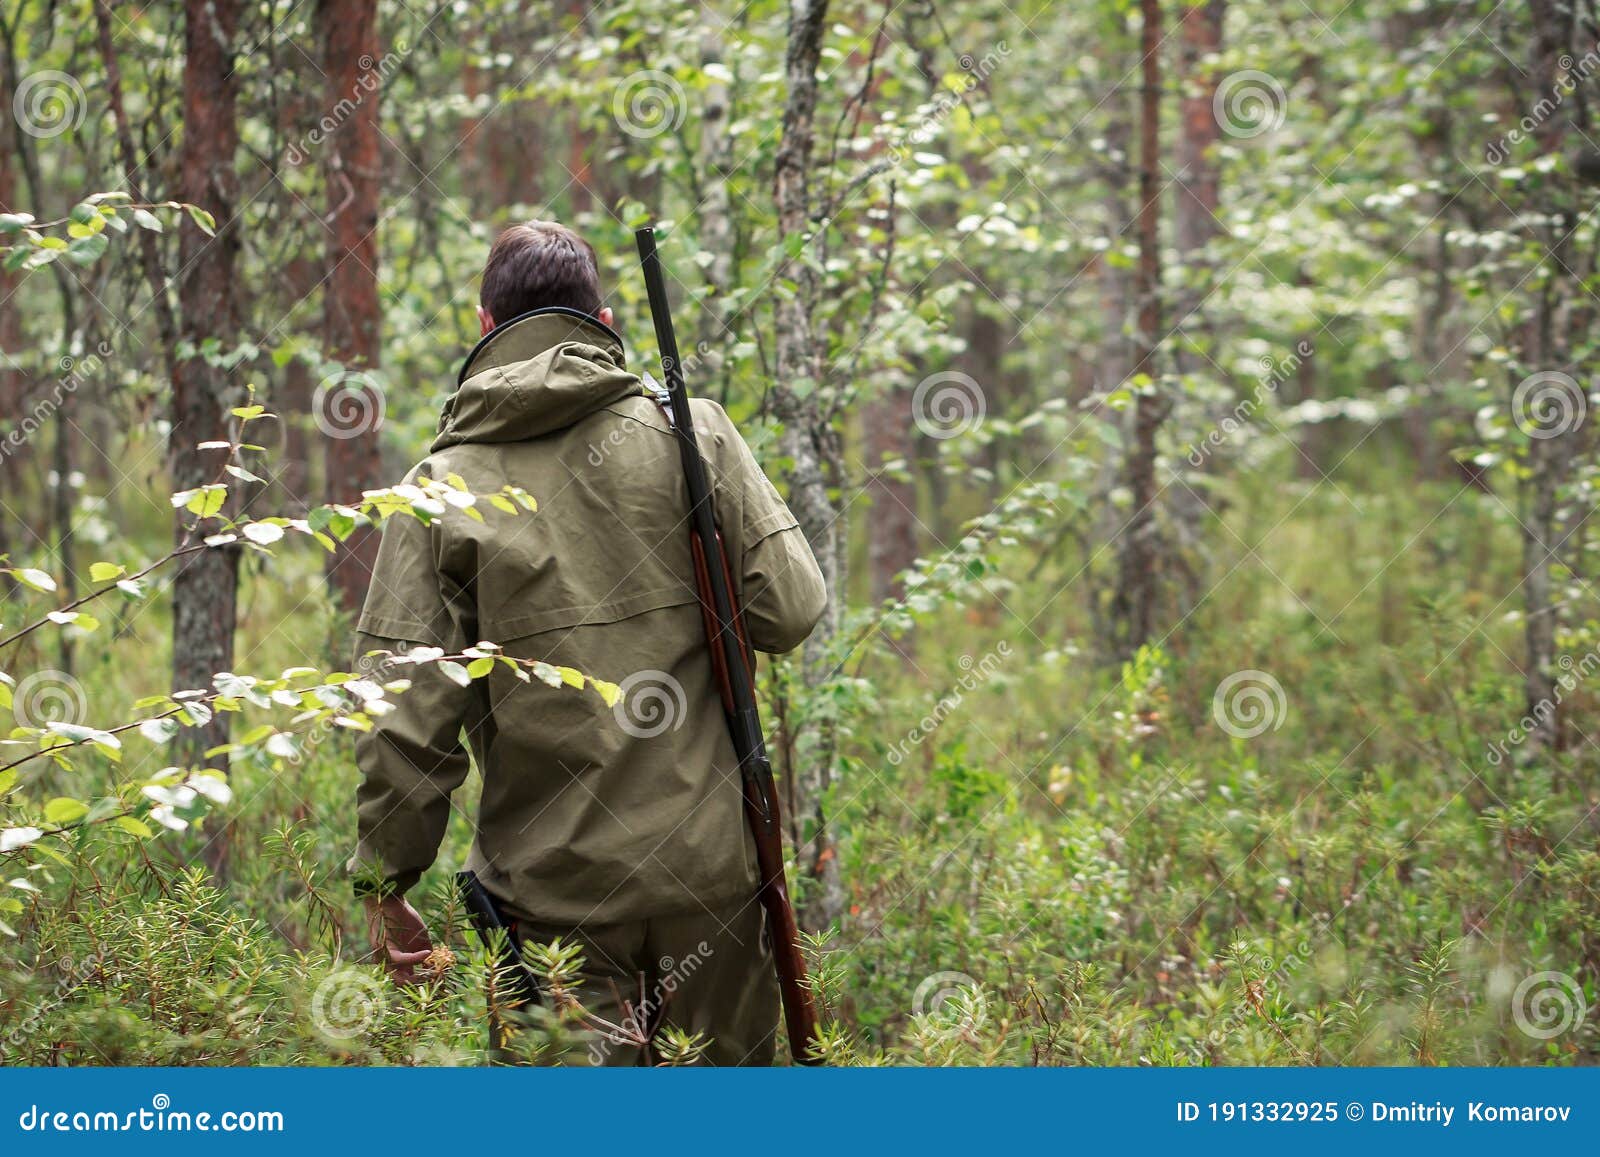 hunter with shotgun walking in the forest. hunting season. fowling piece. wild nature background